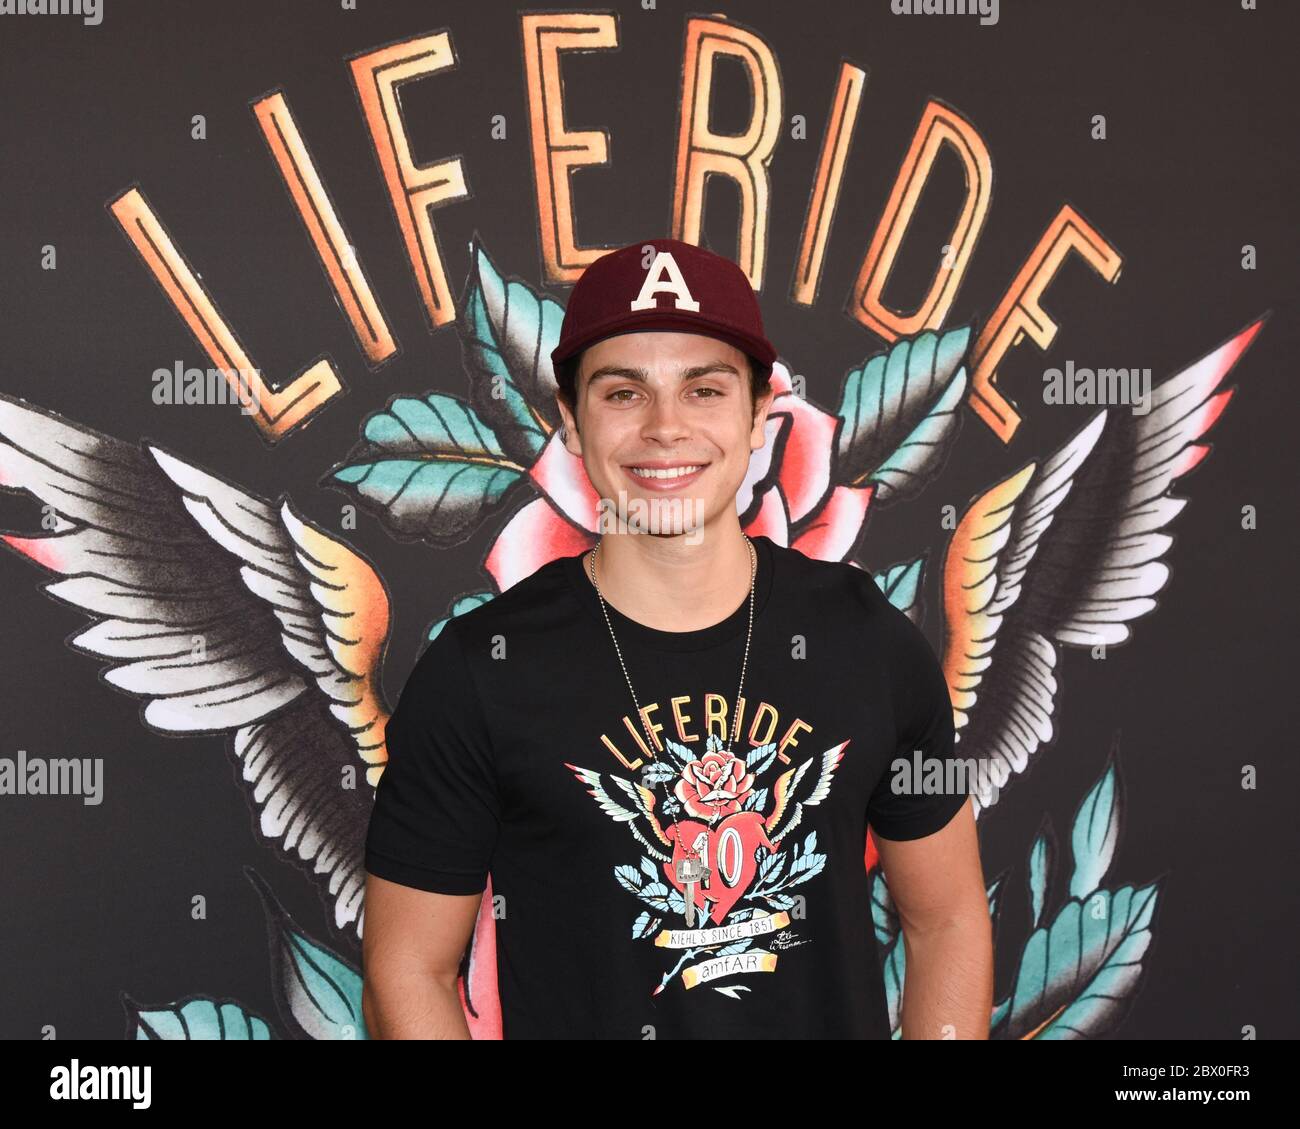 July 27, 2019, Westfield Cabana At The Westfiel, Century City, California: Jake T. Austin attends10th Anniversary Of Kiehl's LifeRide For amfAR To Benefit HIV/AIDS Research in Century City at Westfield Century City in Century City .on July 27 2019. (Credit Image: © Billy Bennight/ZUMA Wire) Stock Photo